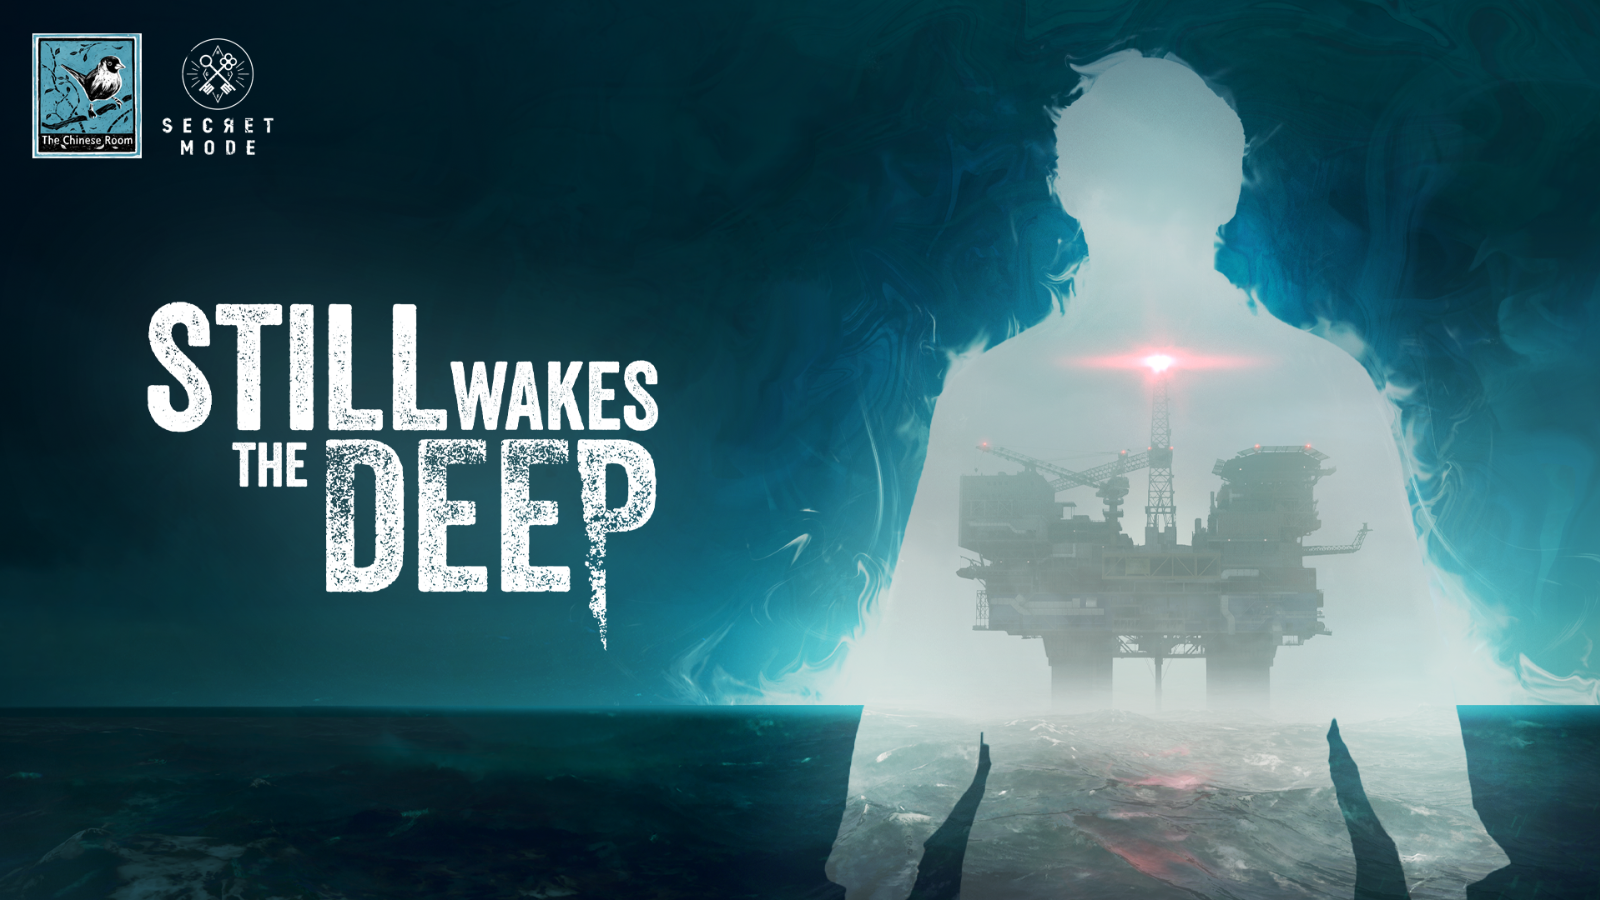 Top of the Trends: Still Wakes the Deep Makes Waves